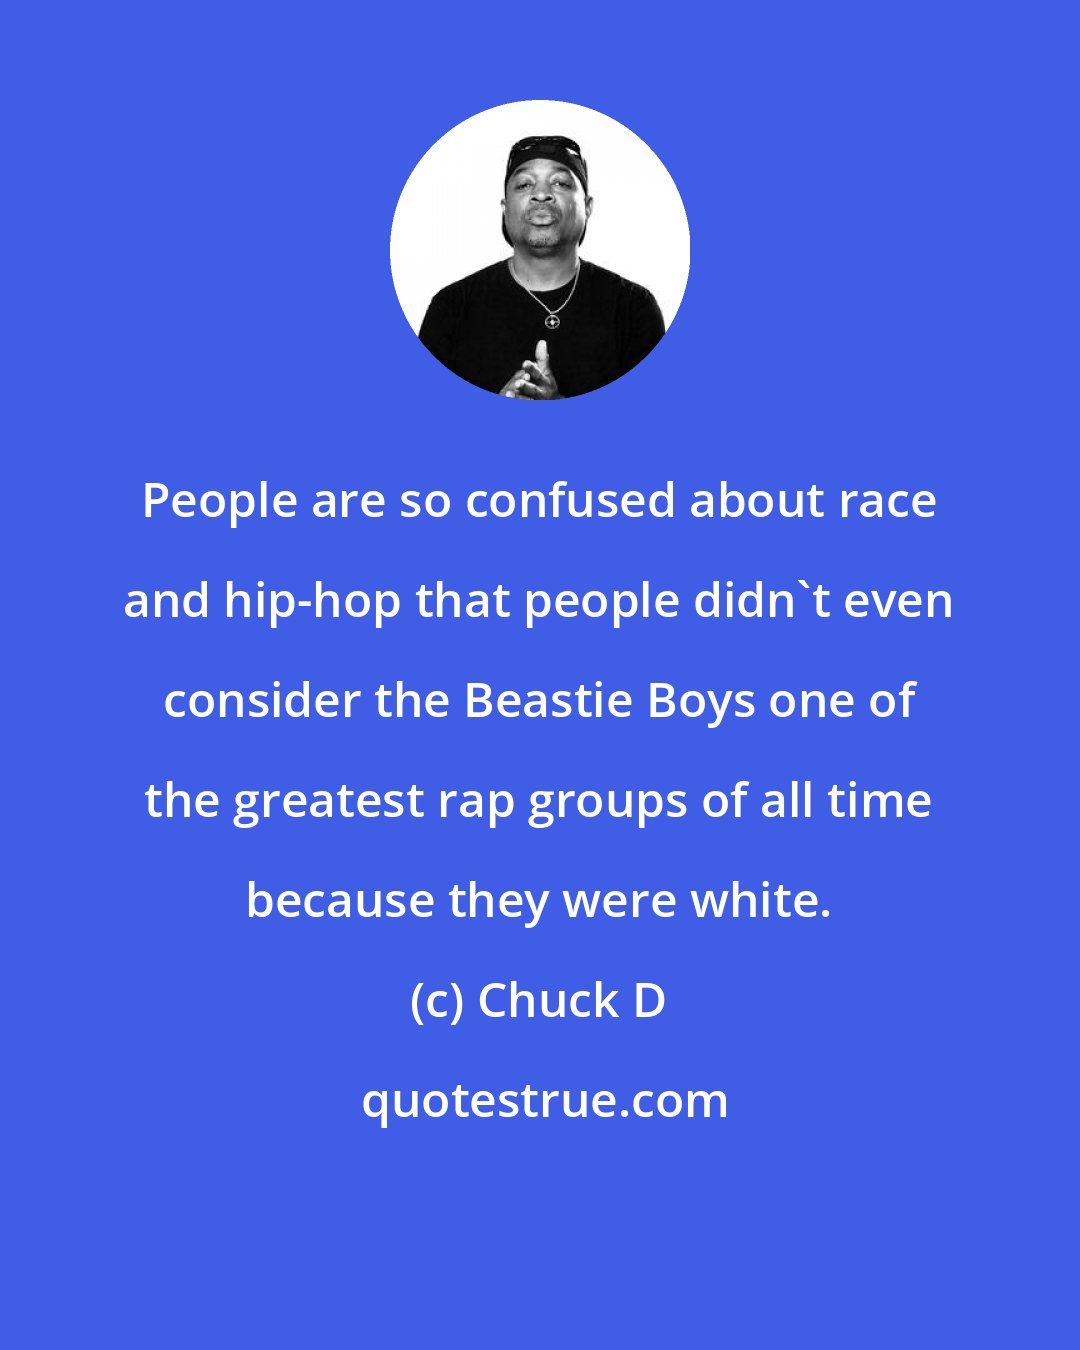 Chuck D: People are so confused about race and hip-hop that people didn't even consider the Beastie Boys one of the greatest rap groups of all time because they were white.